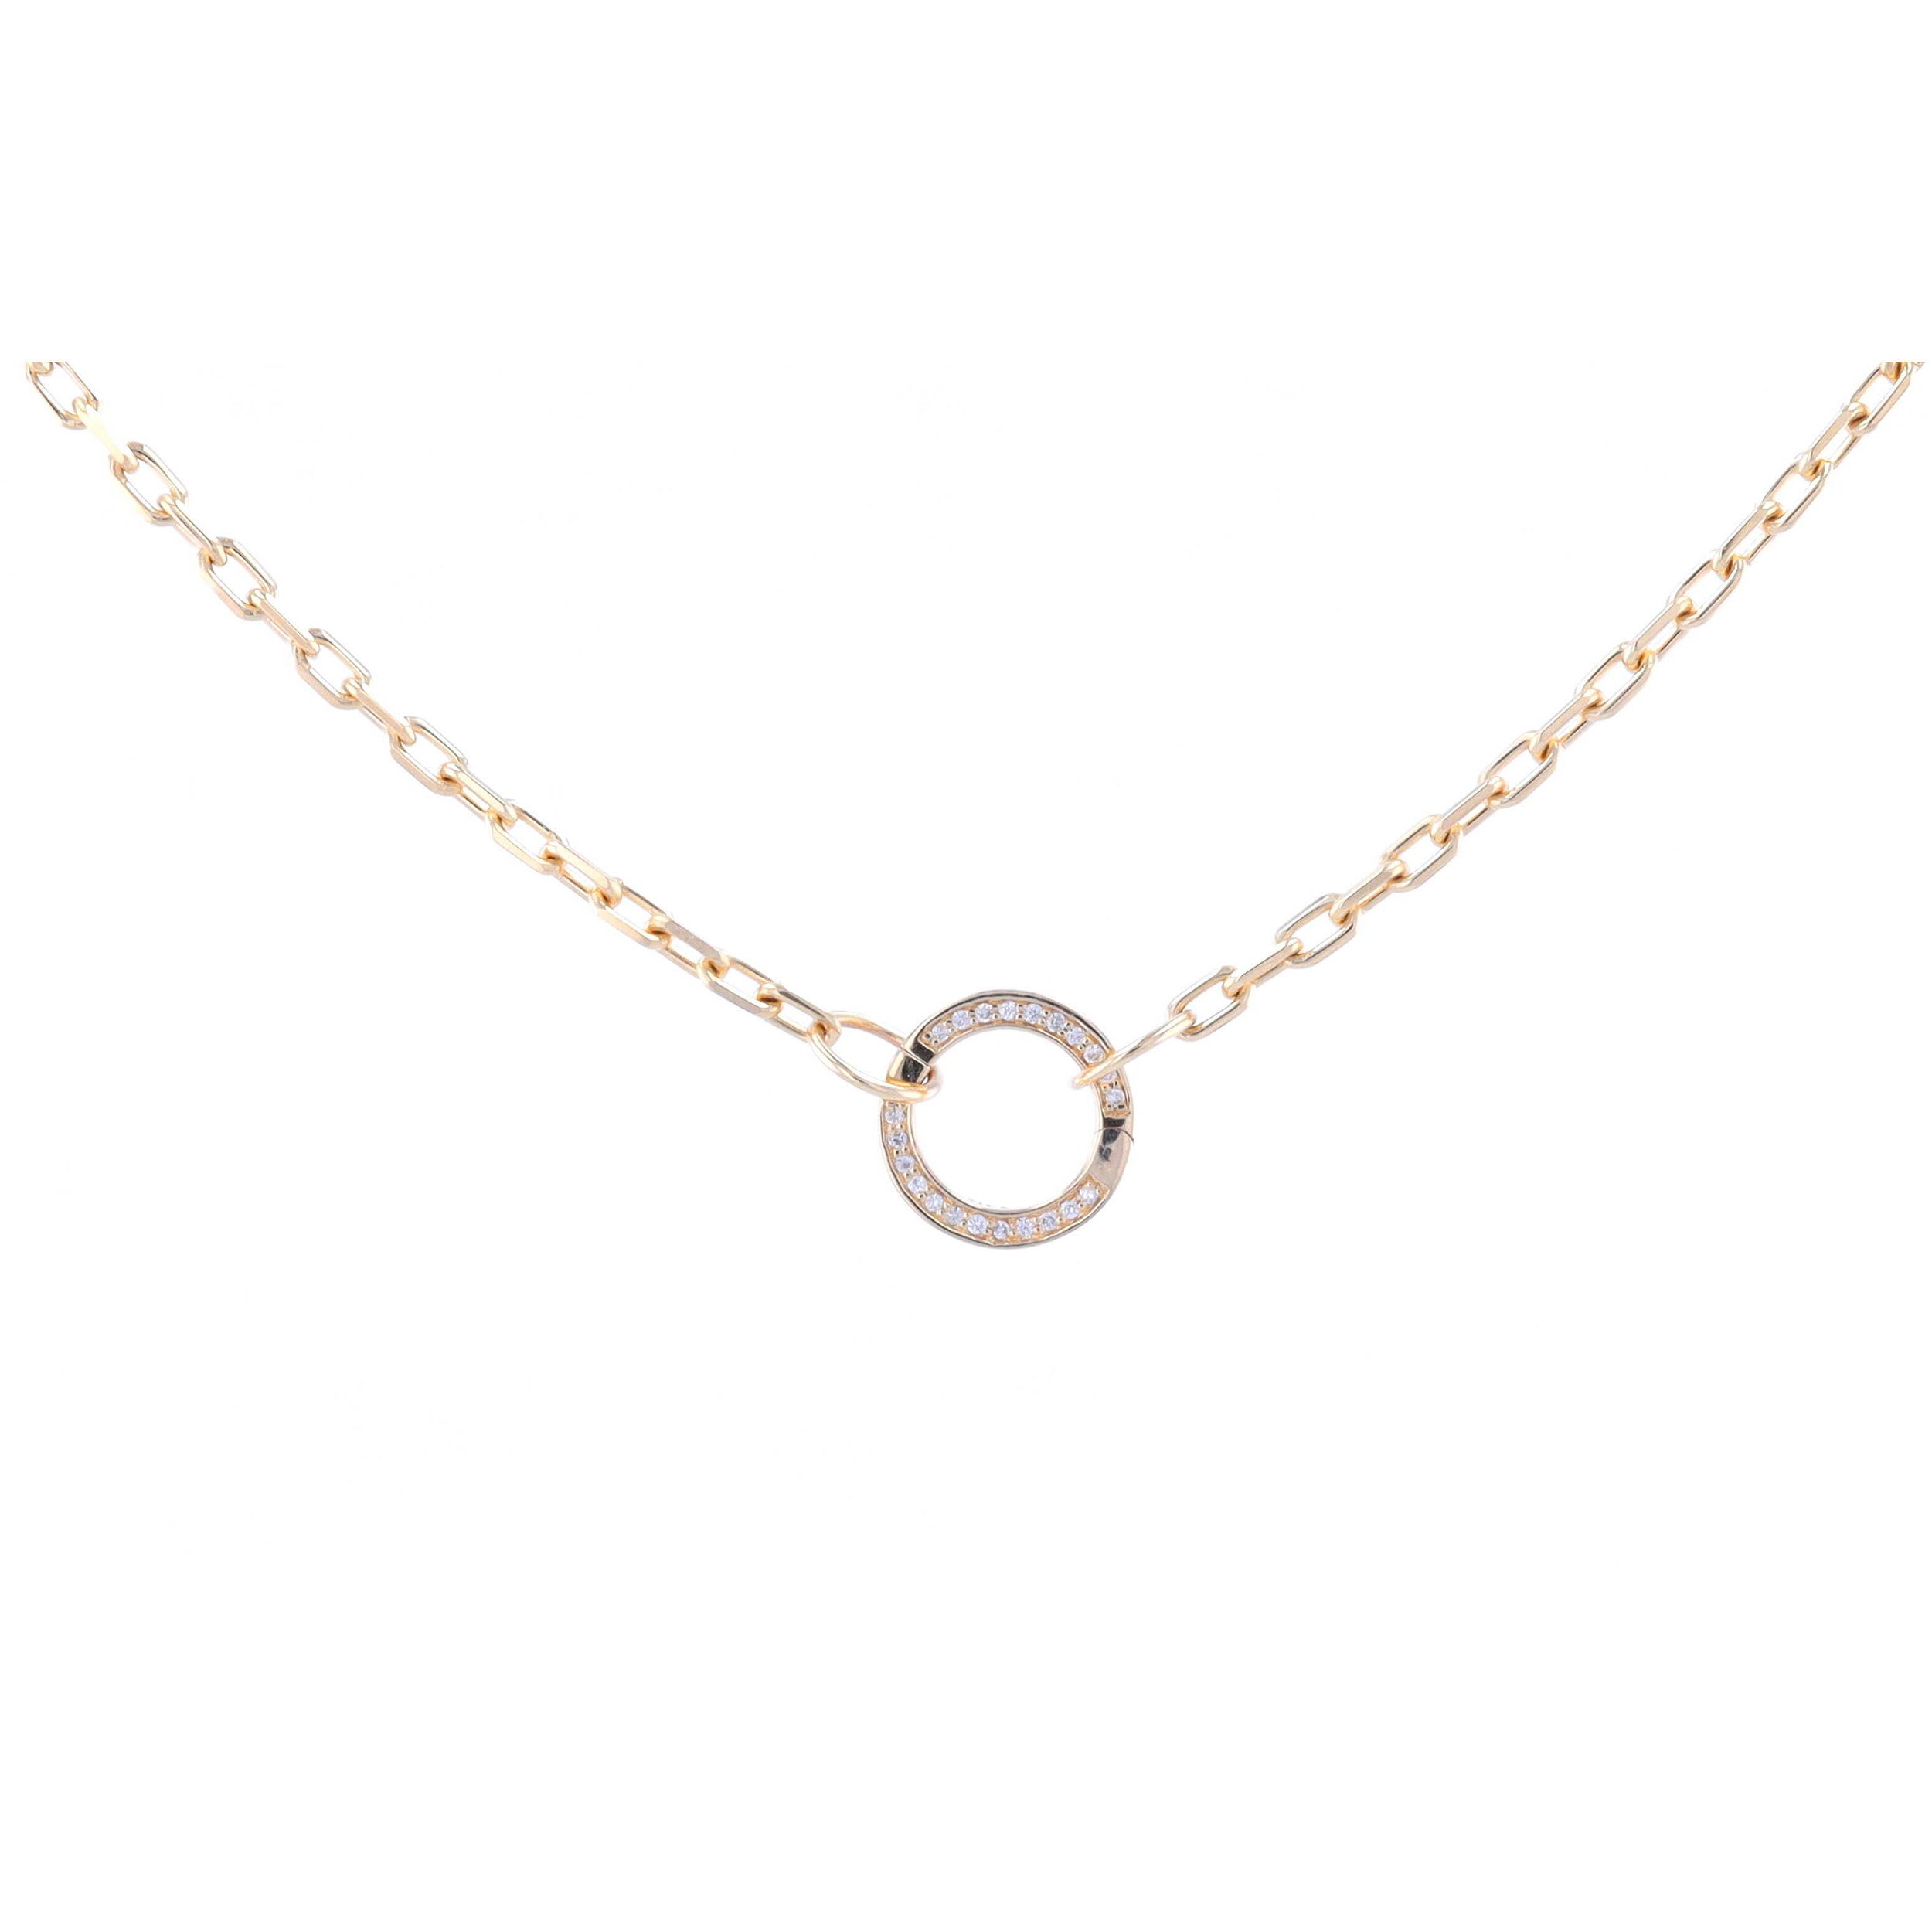 18" 14k Yellow Gold Long Box Chain With Small Circle Openable Bale with Diamonds